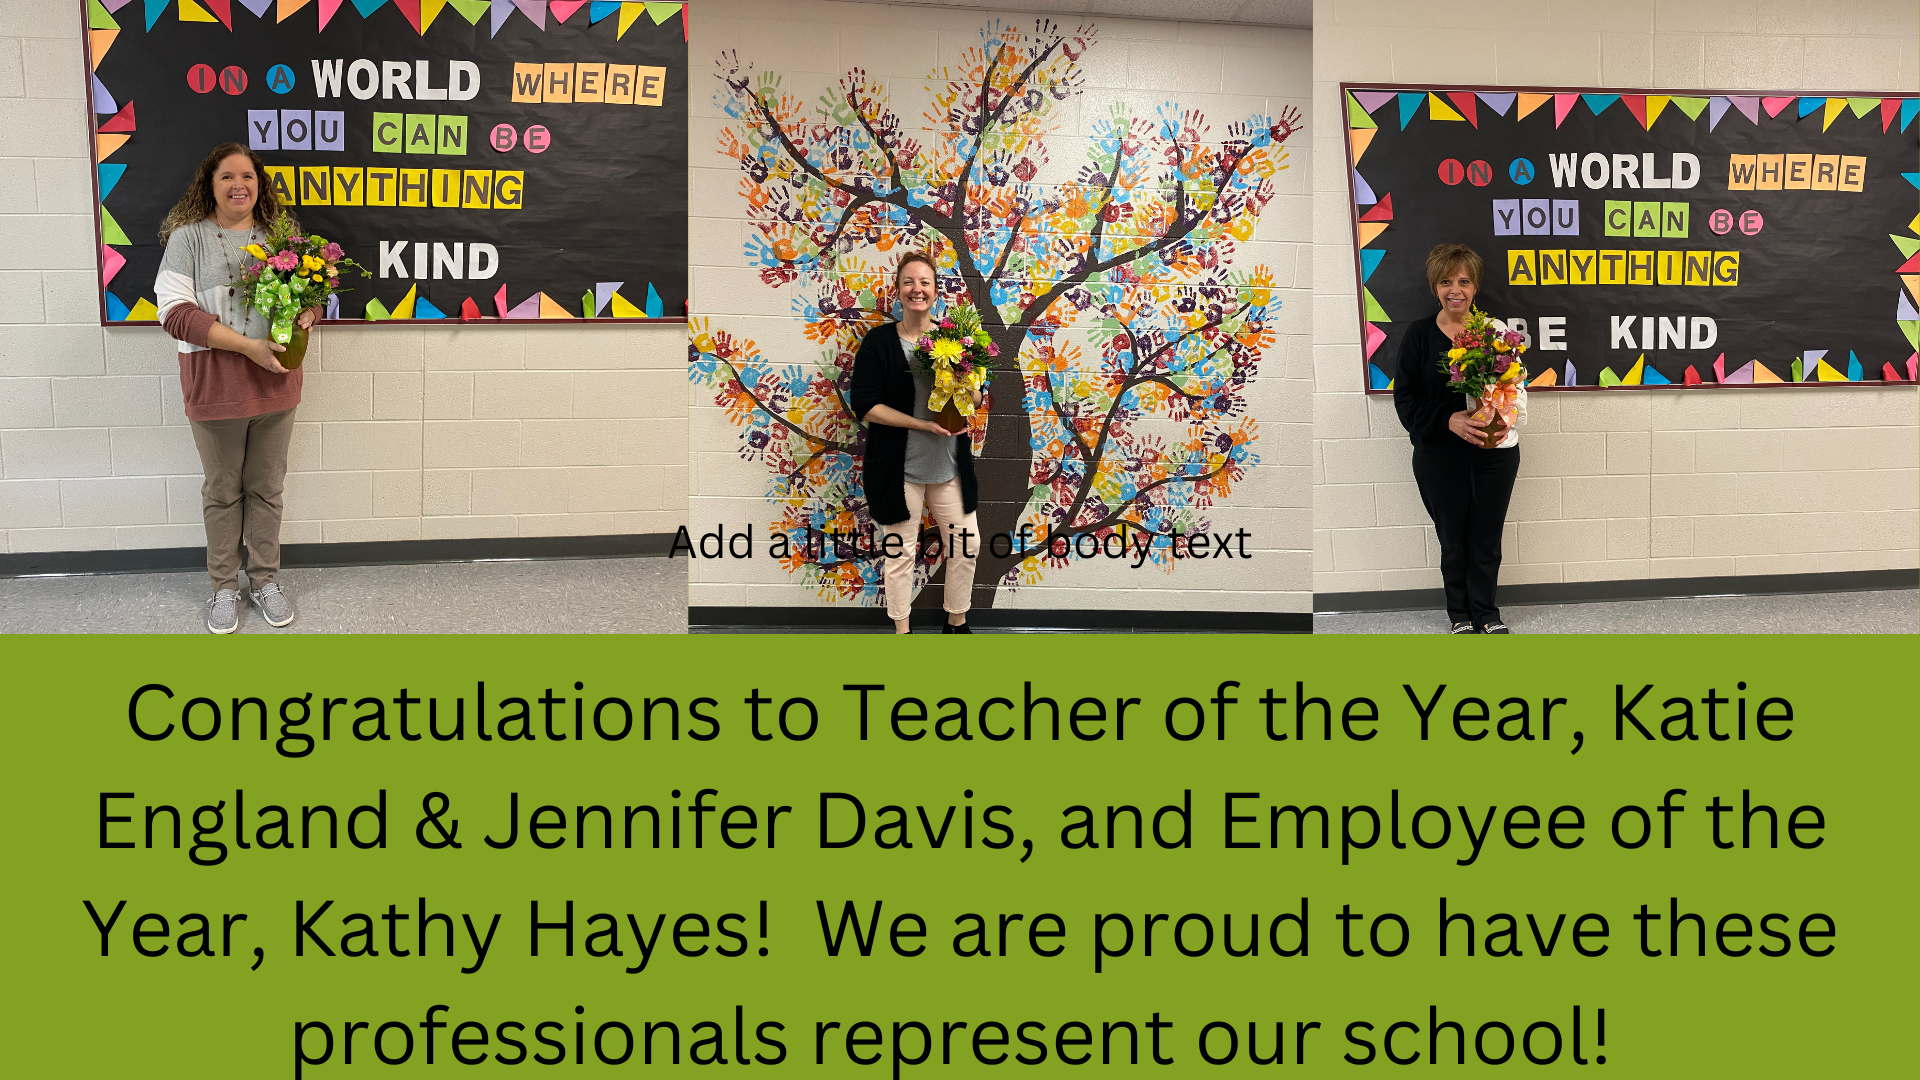 Teacher of the Year, Katie England & Jennifer Davis and Employee of the Year, Kathy Hayes